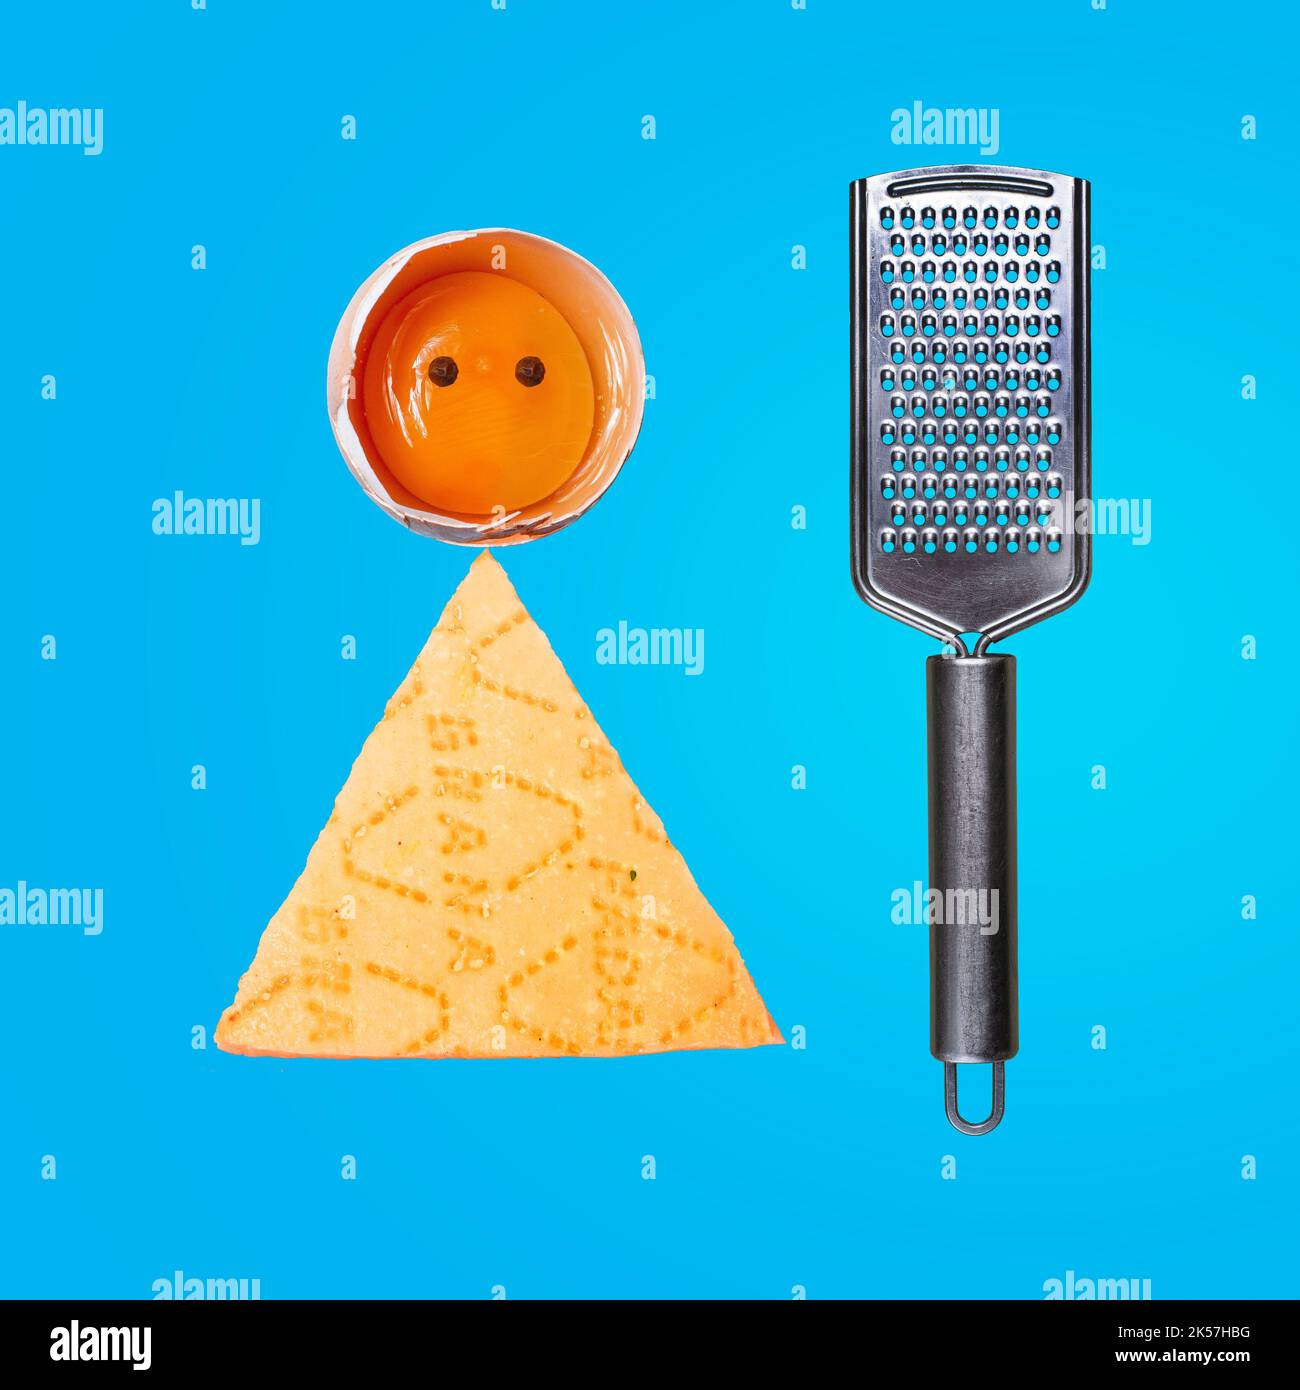 Modern concept concept. Egg and Parmesan man with a cheese grater. Idea for business, marketing and advertising. Copy the background. Place for text Stock Photo